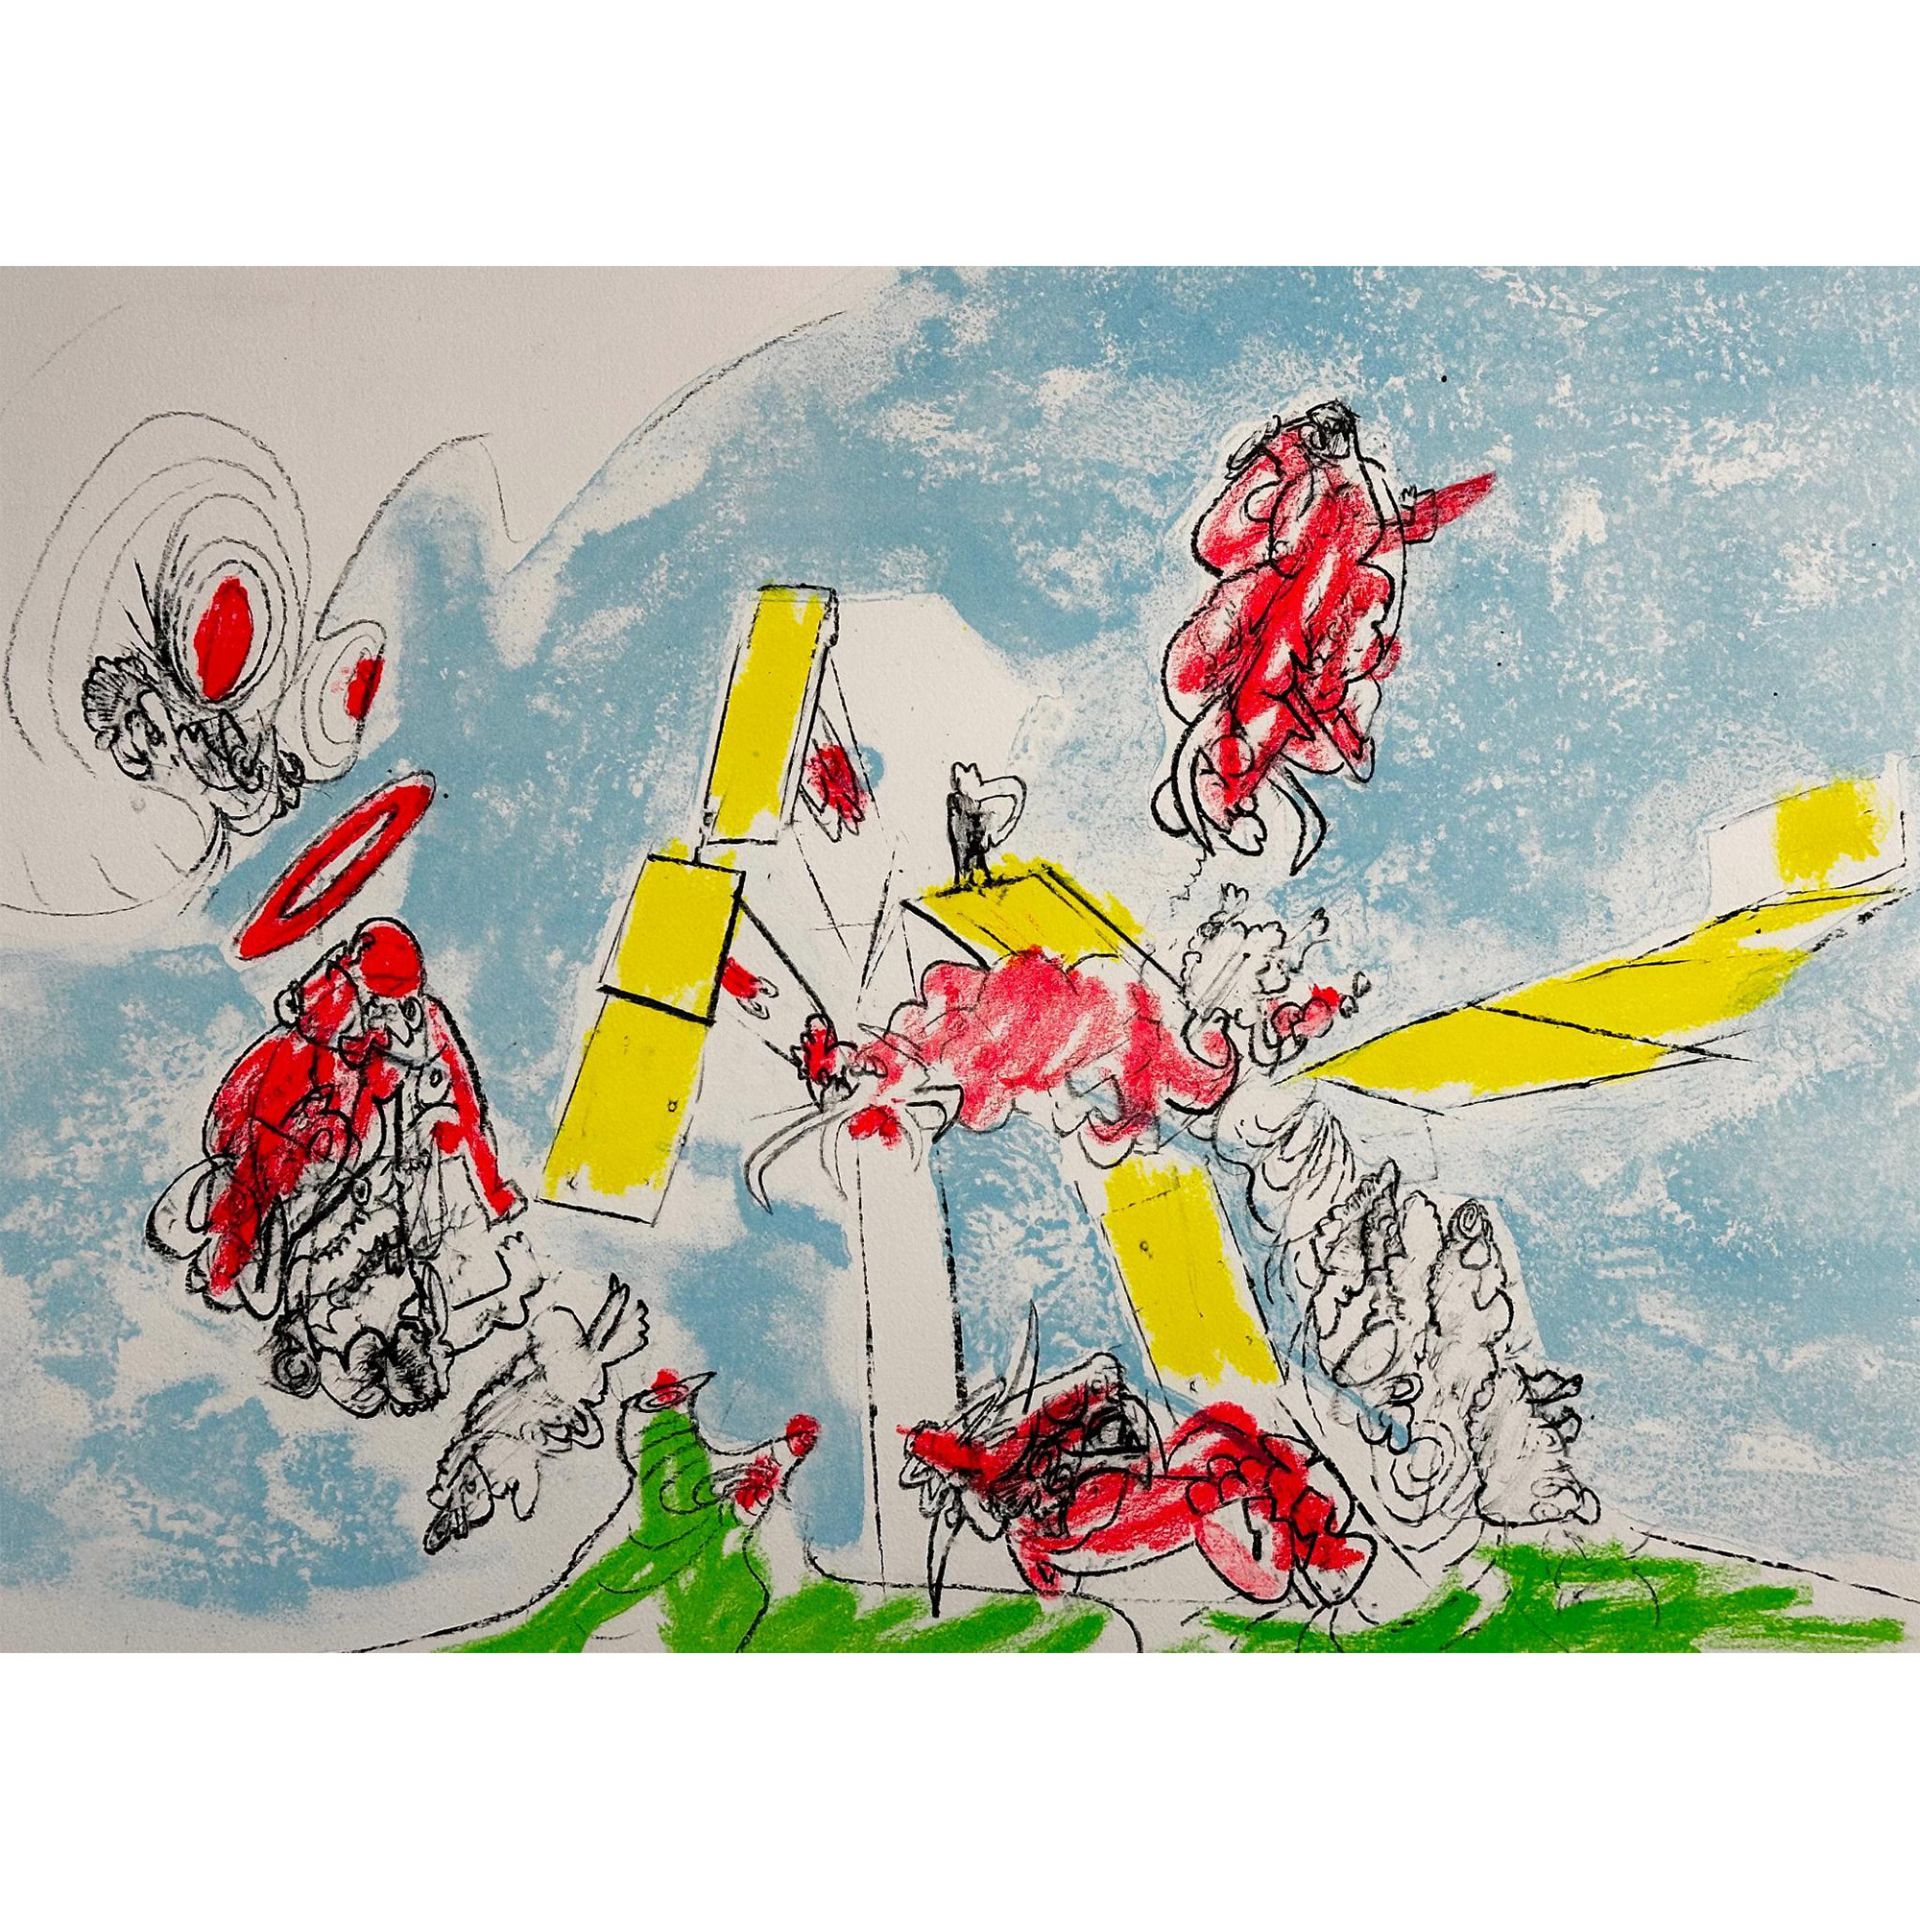 Roberto Matta (Chilean ) 1911-2002, Lithograph From Fog, Mog, Images 2, signed - Image 2 of 4